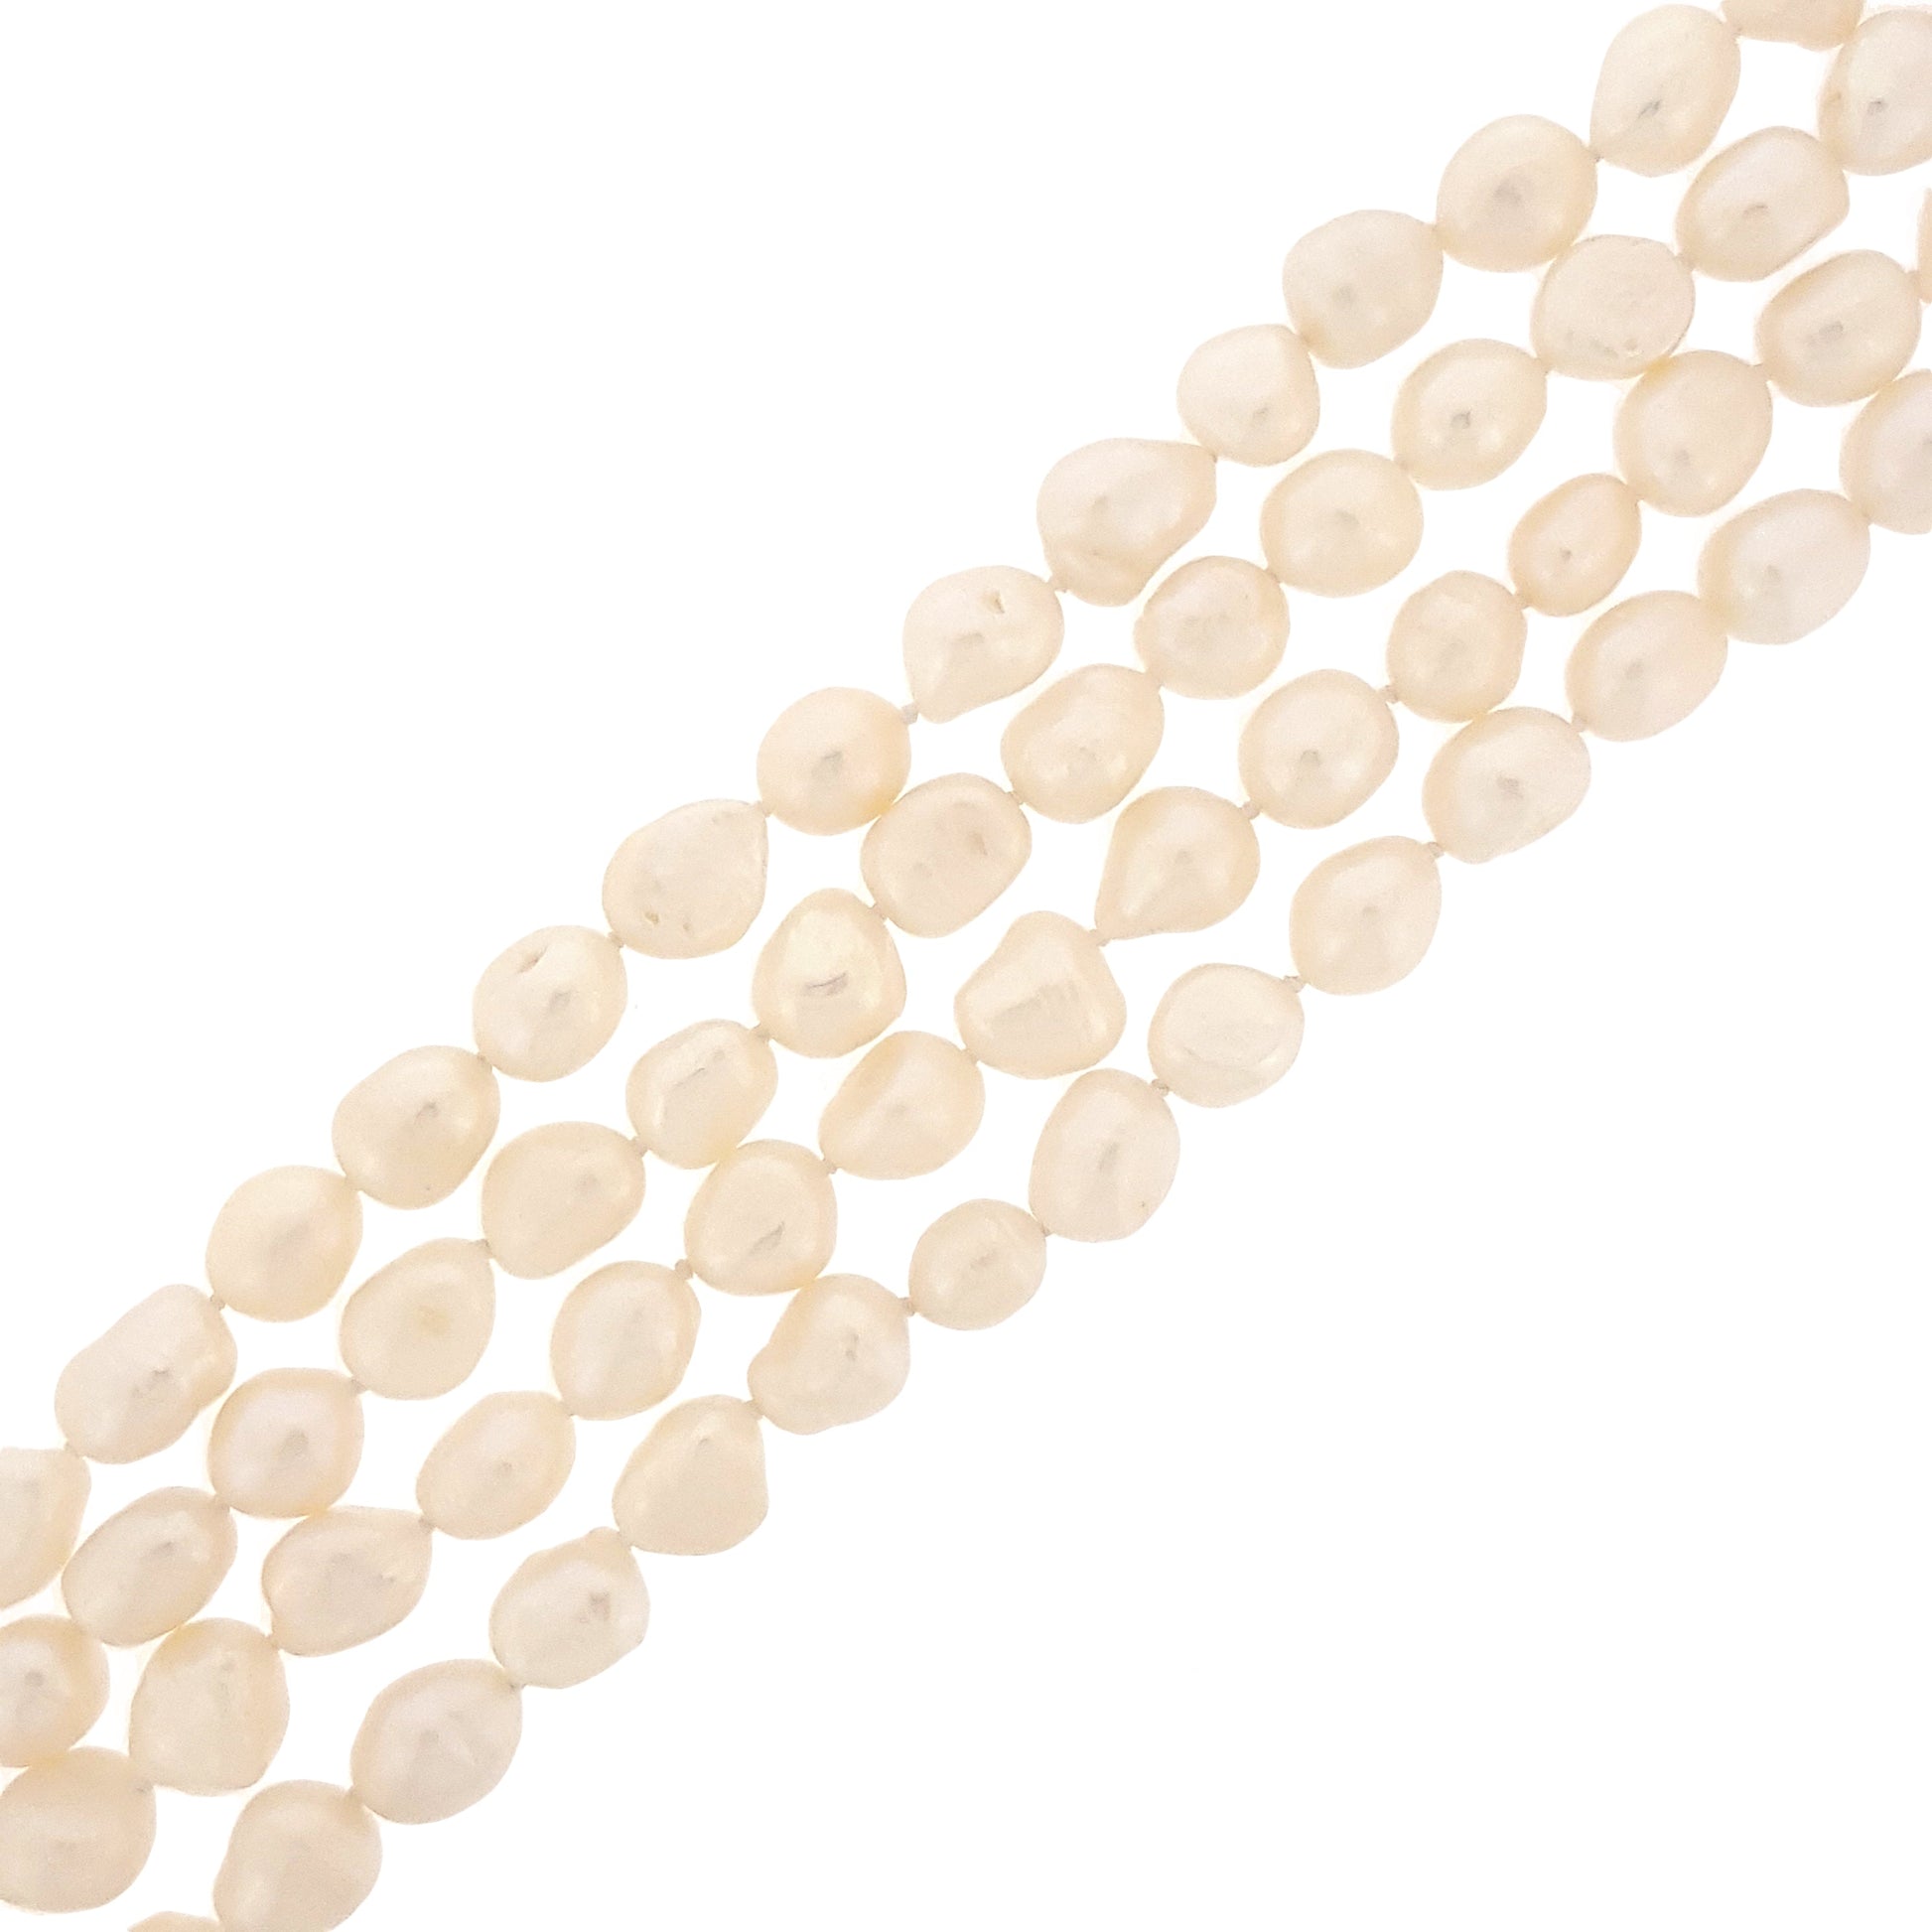 Pearl Necklace 'Longstrand' White 160cm Cultured Pearls| The Courthouse Collection